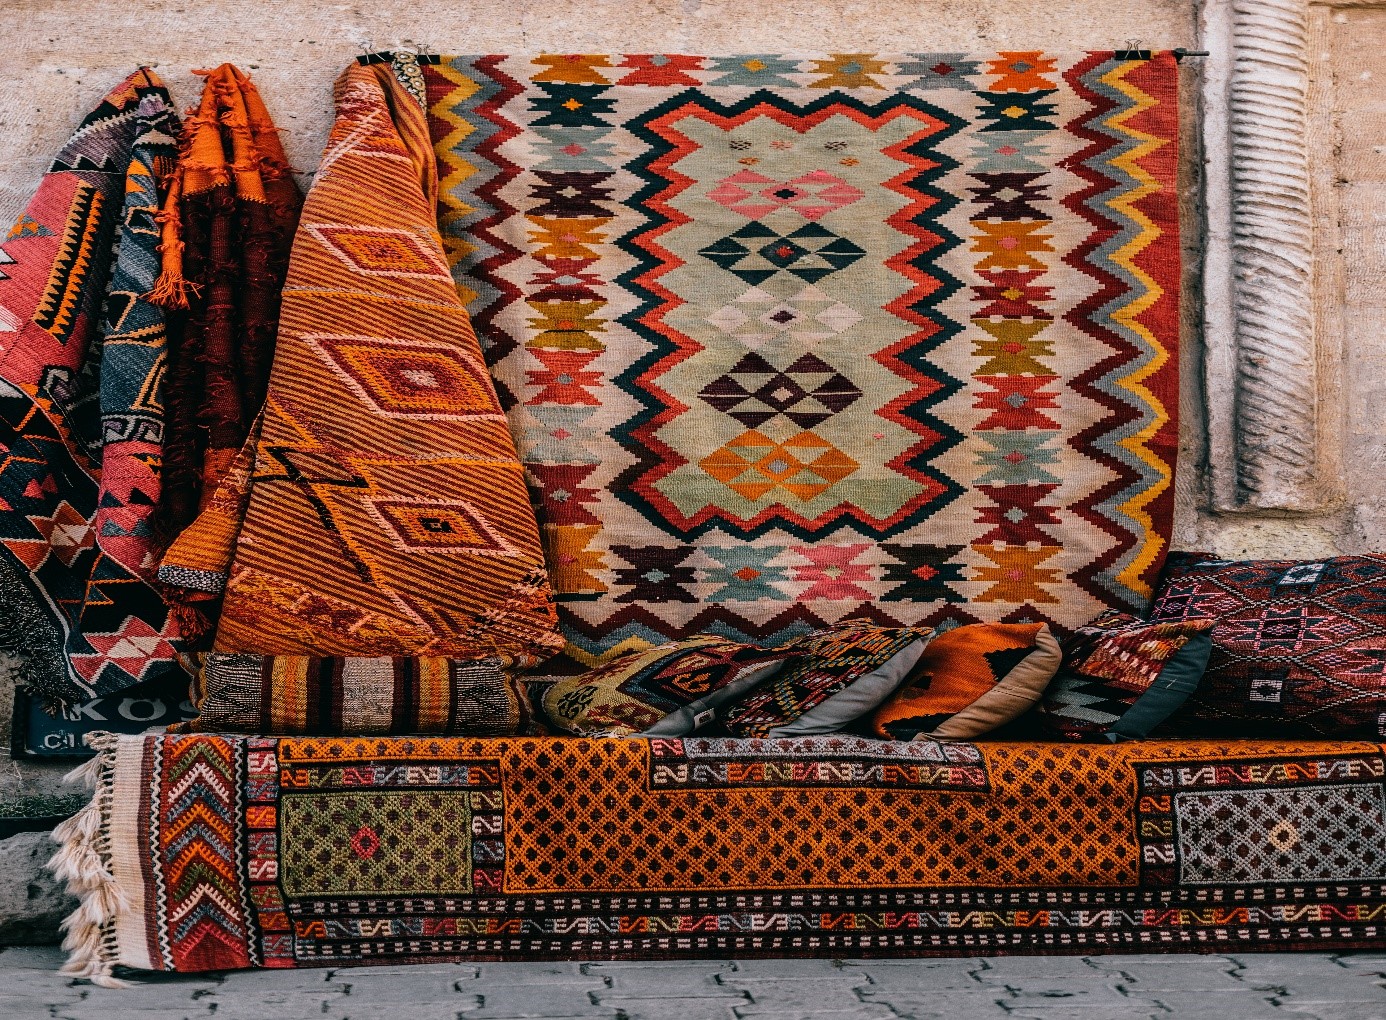 5 Major Reasons Why You Should Kilim Rugs For Your Home